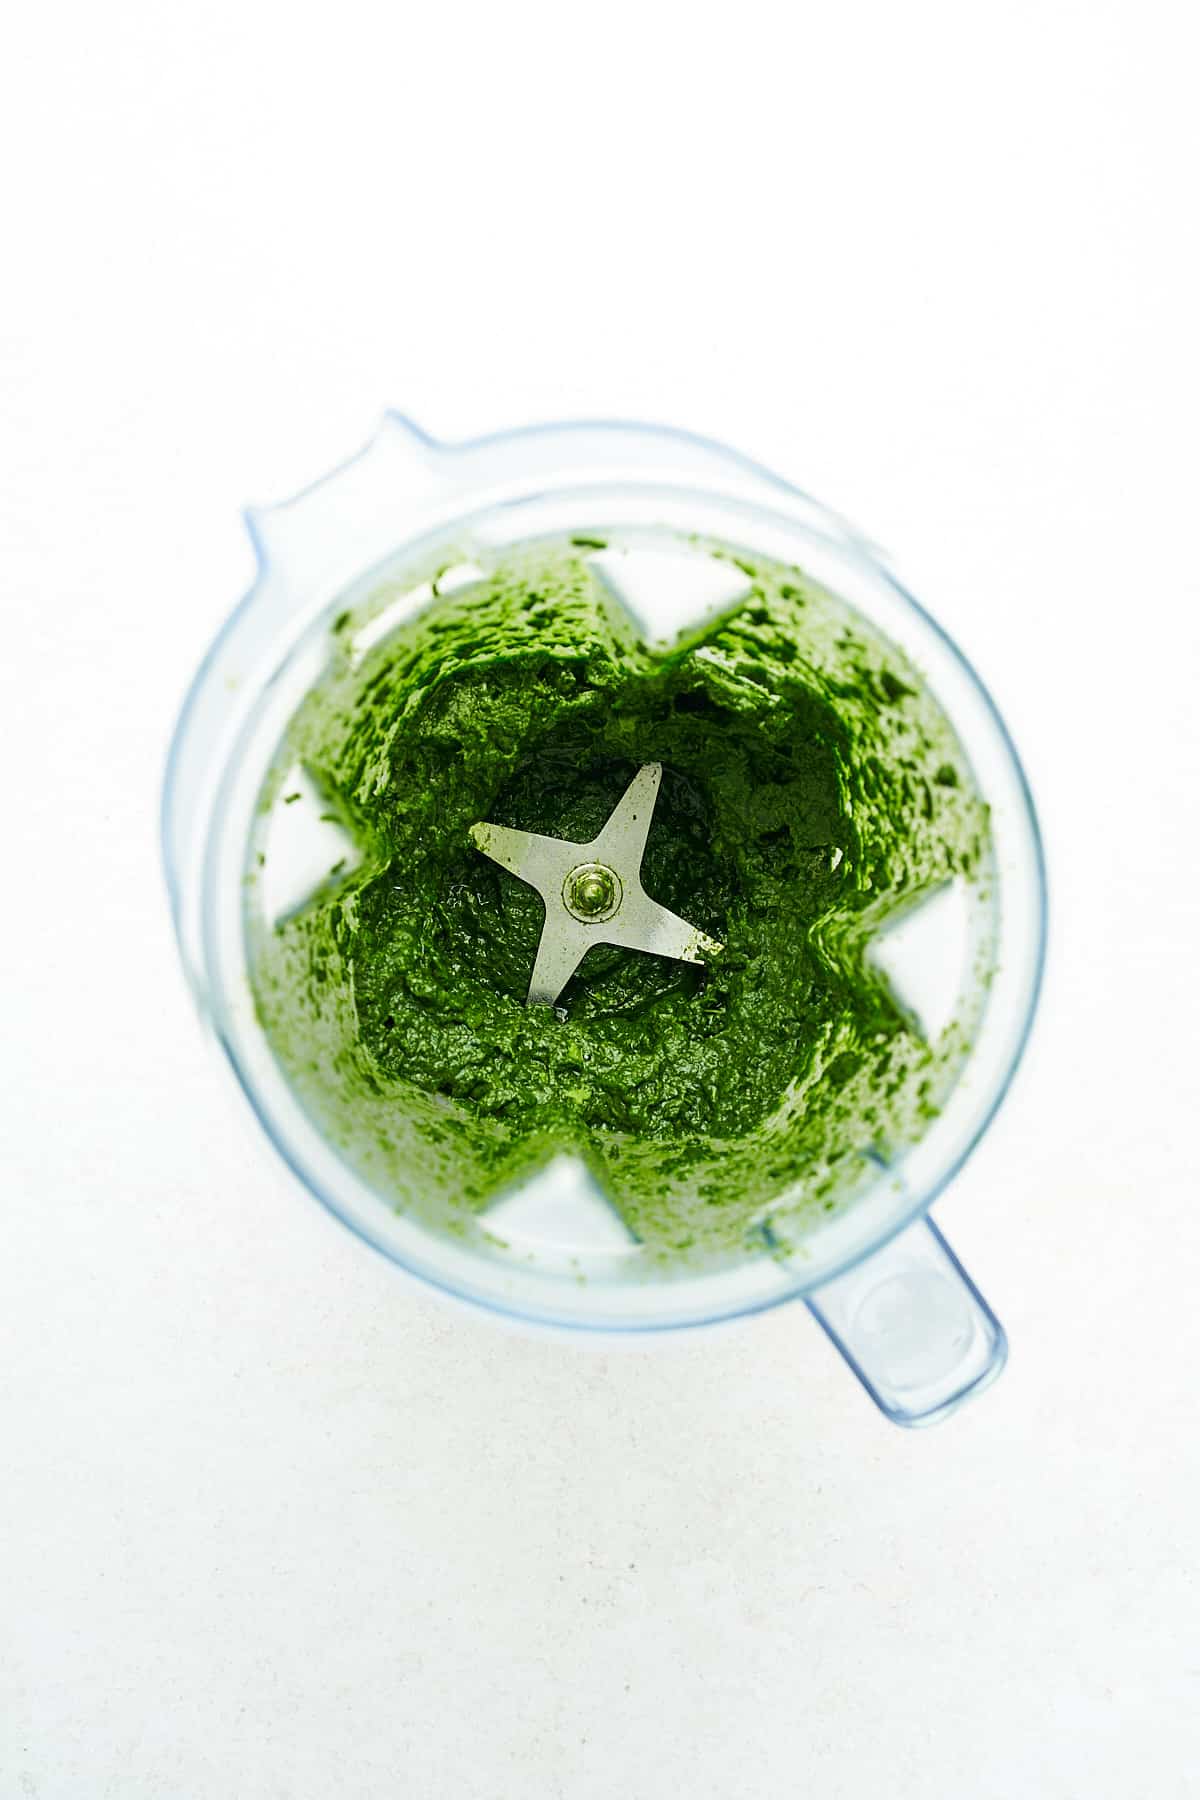 Pureed spinach in a blender.